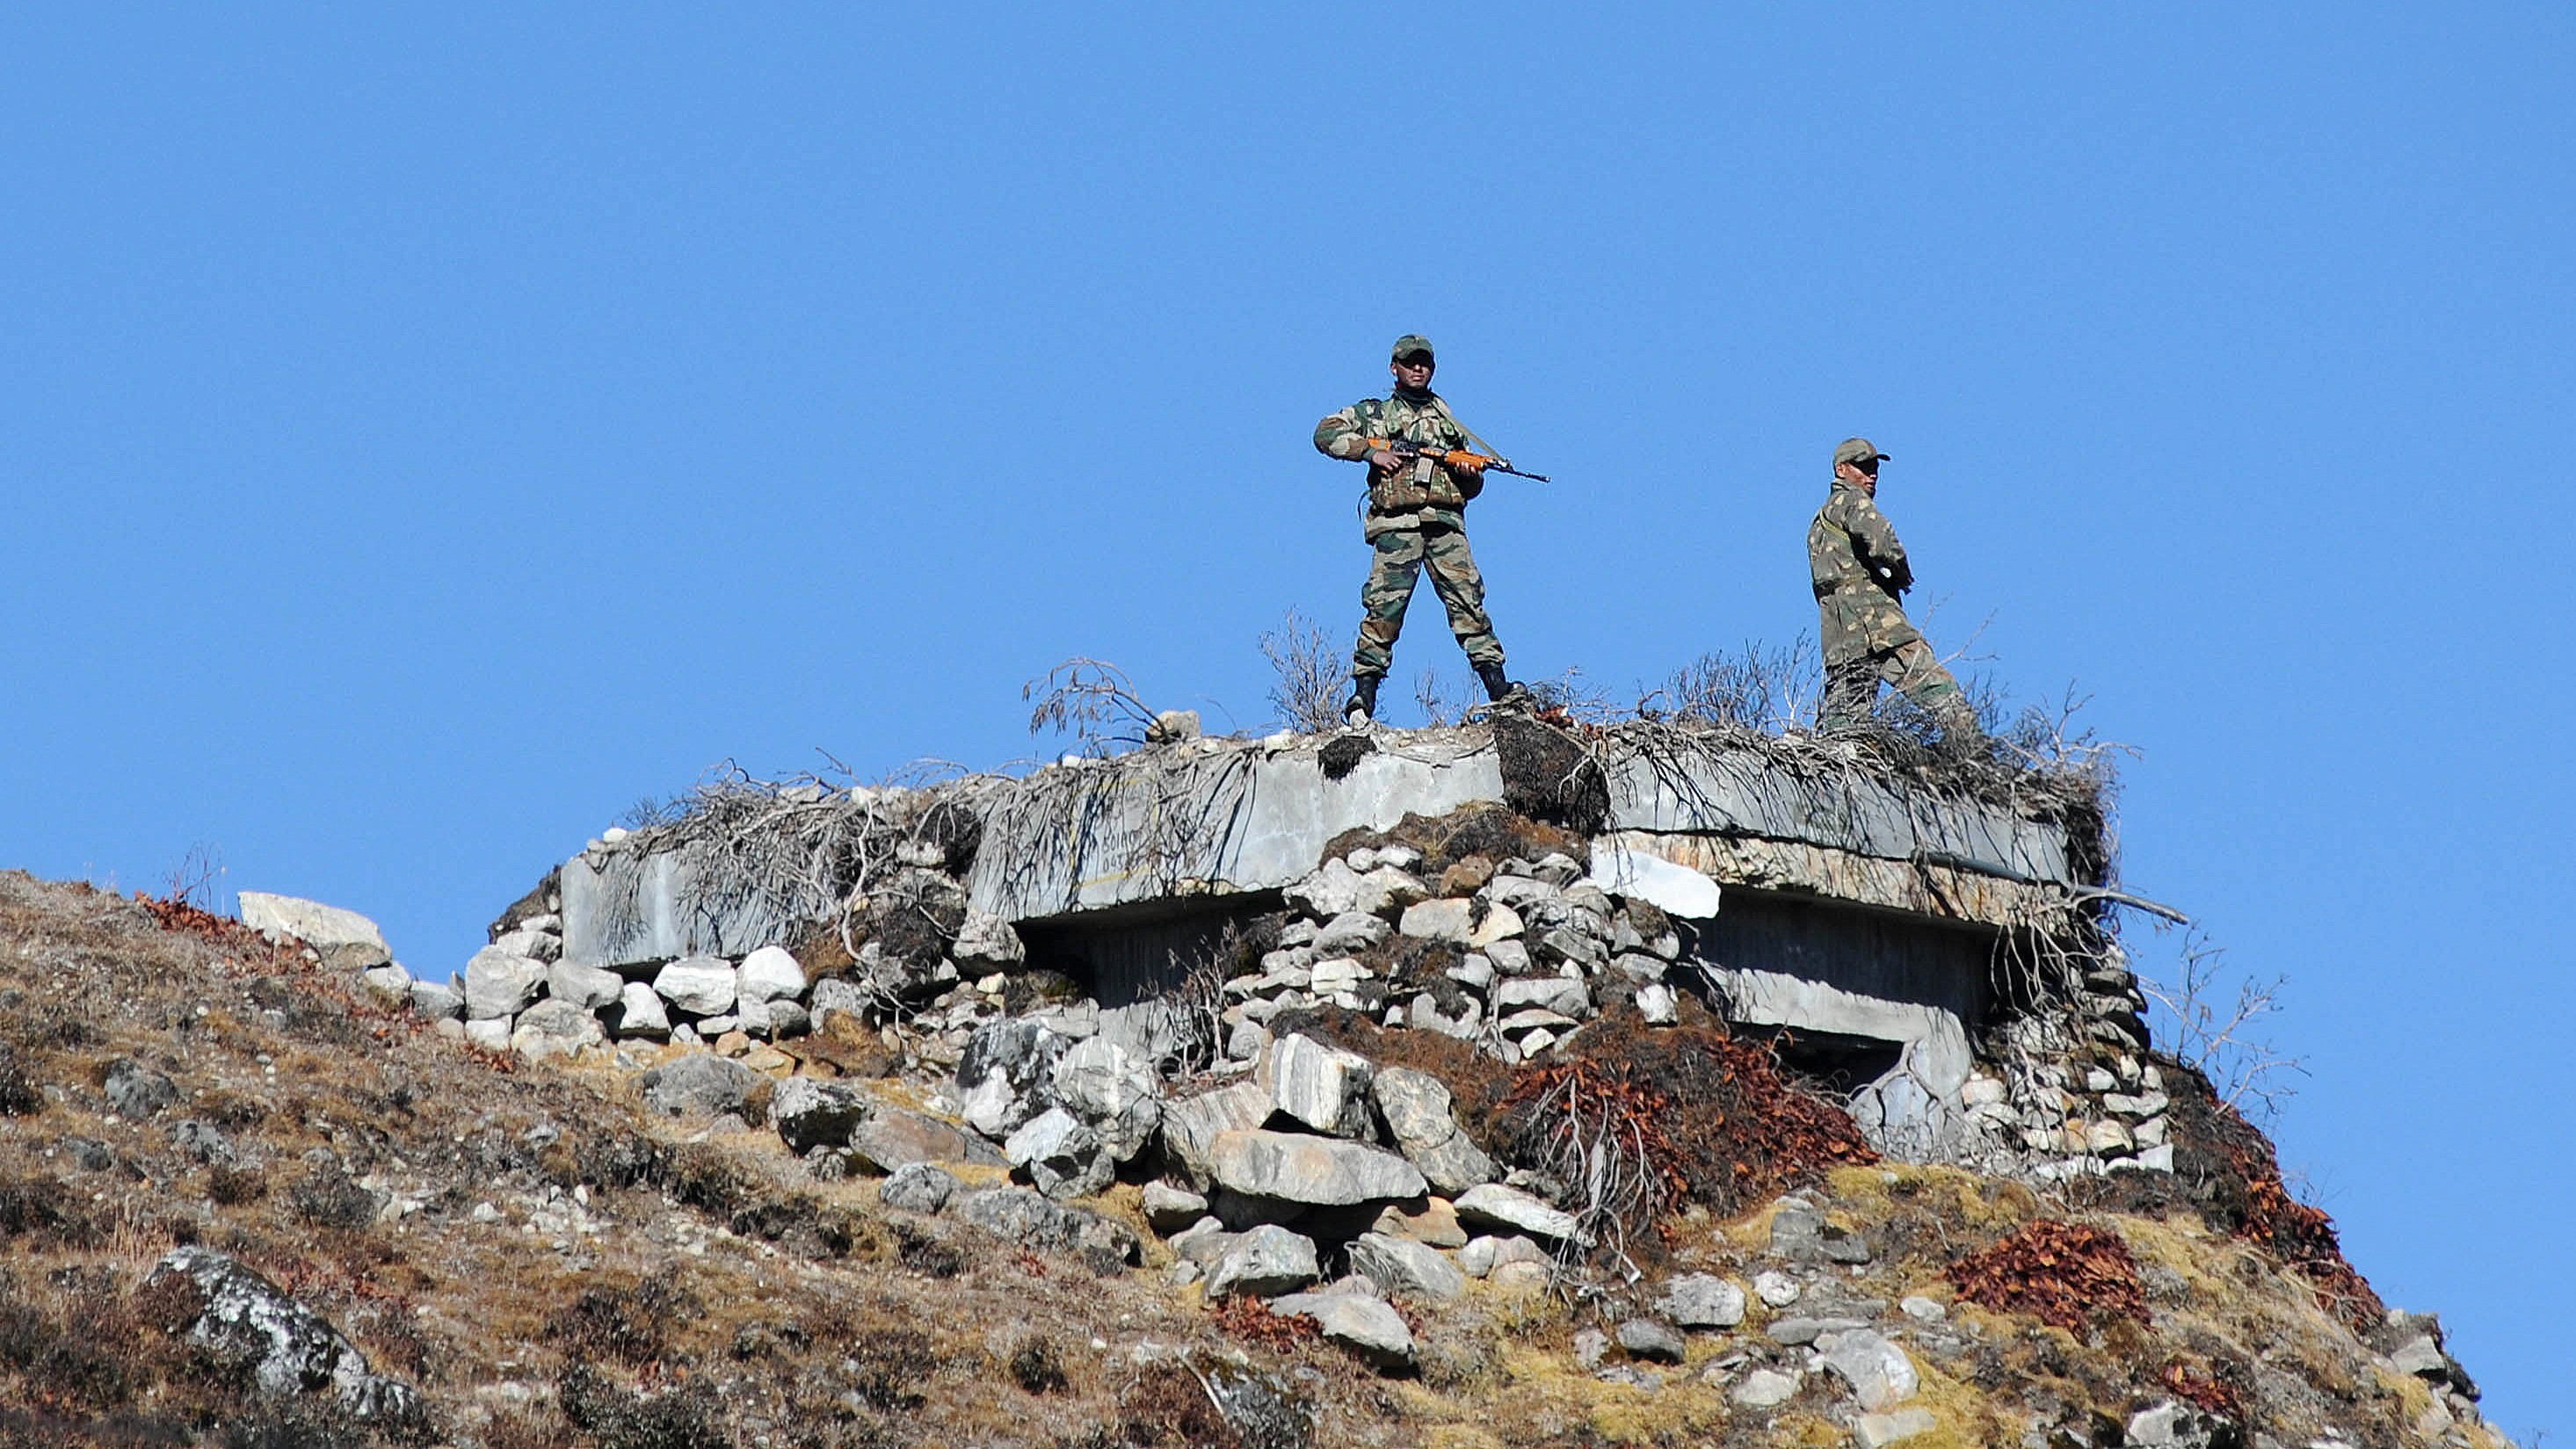 Indian Army personnel keep watch at the Sino-Indian border in Arunachal Pradesh. Photo: AFP